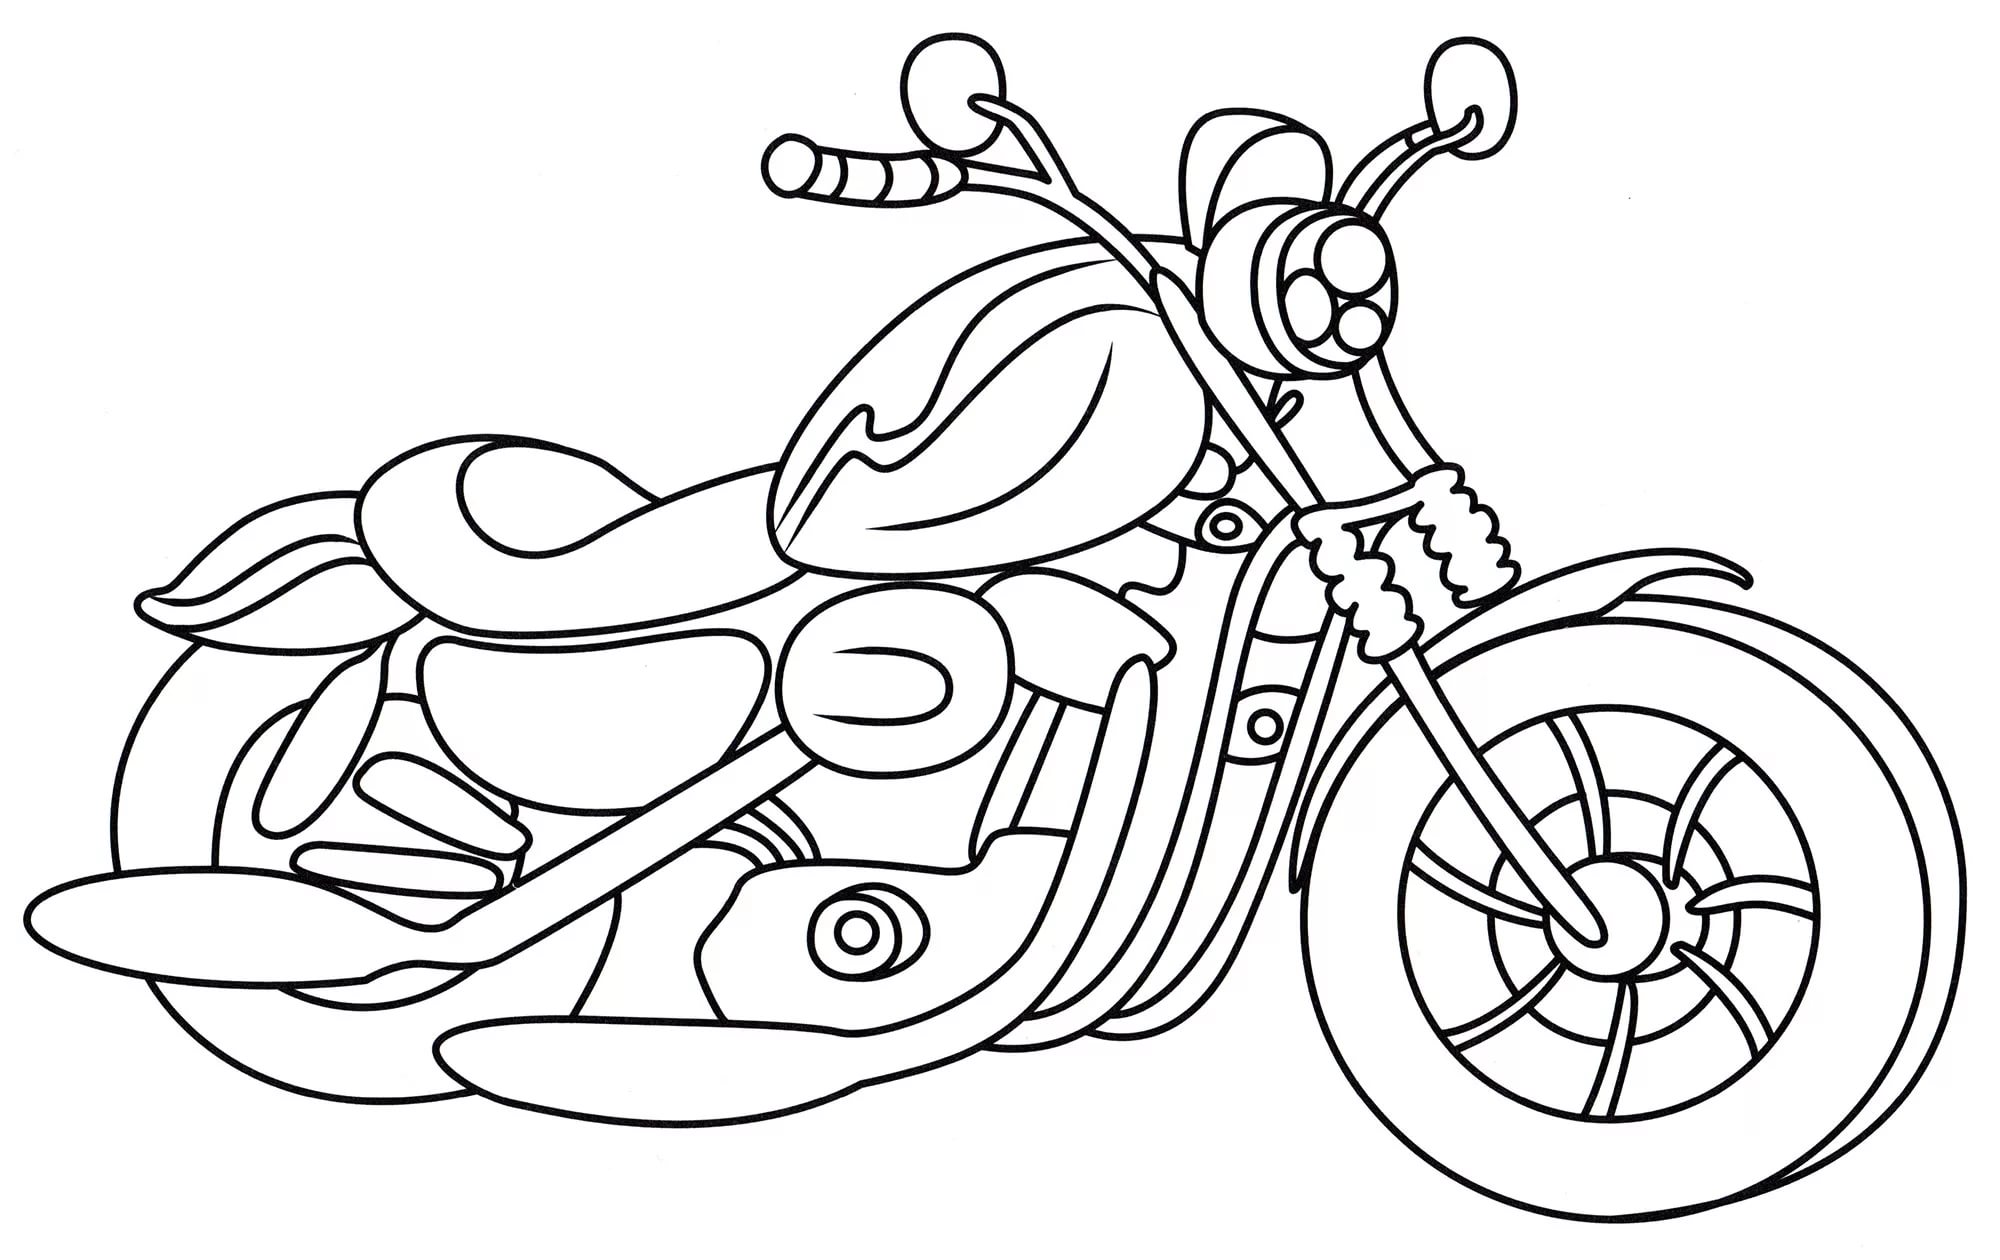 Motorcycle Coloring Pages